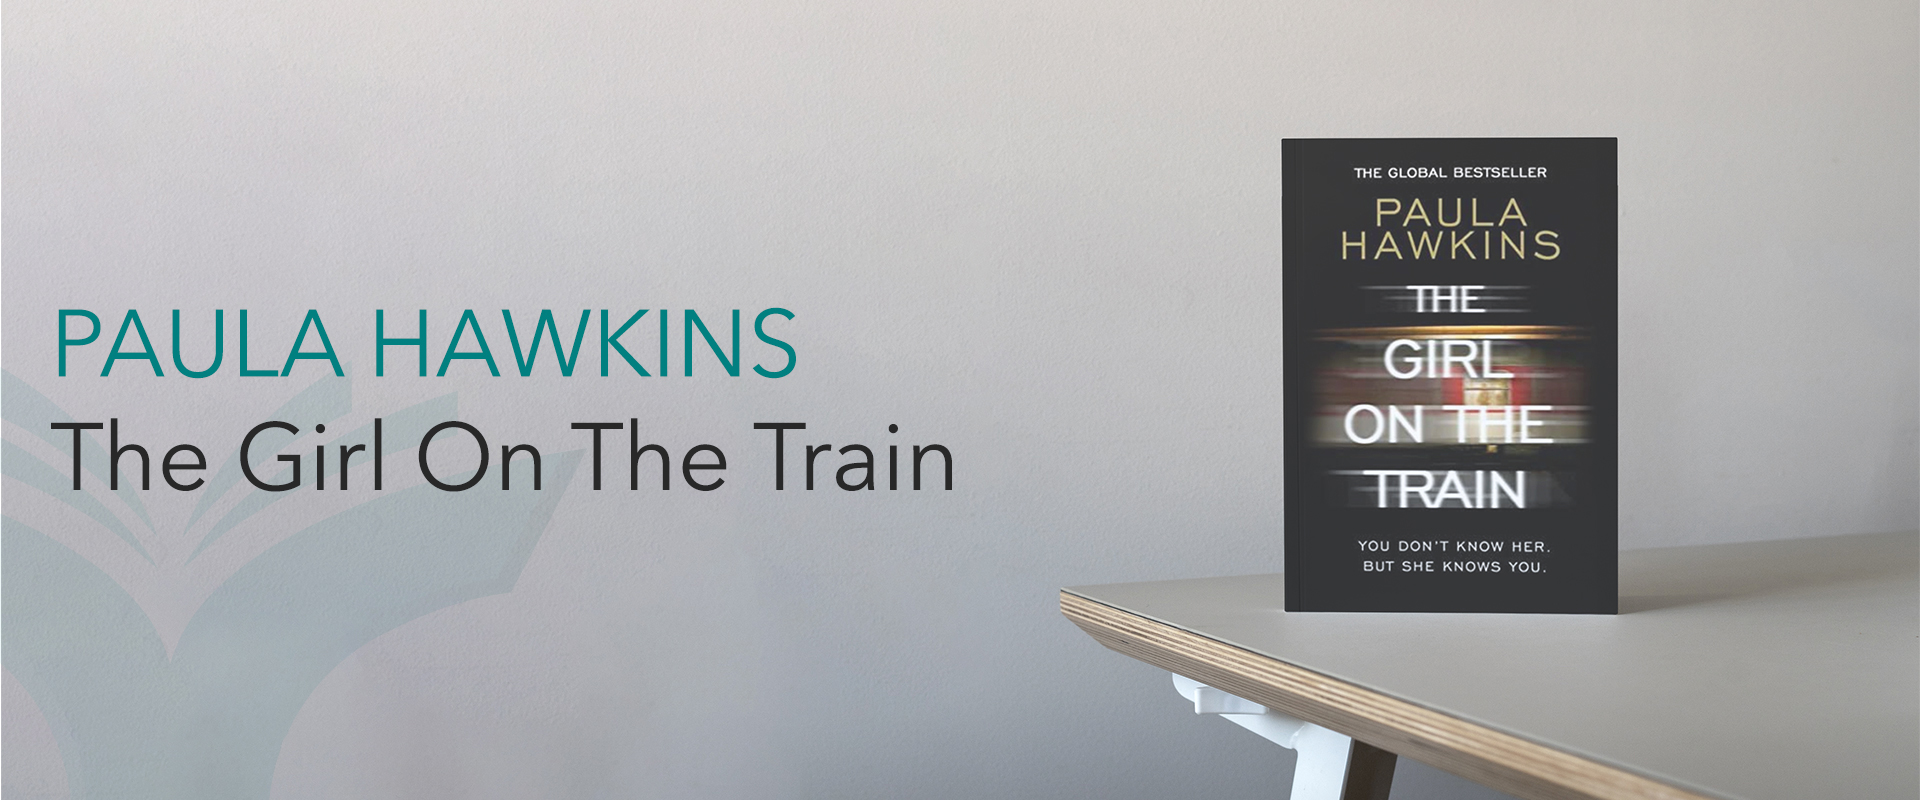 Book-Cover-Fonts-For-THE-GIRL-ON-THE-TRAIN